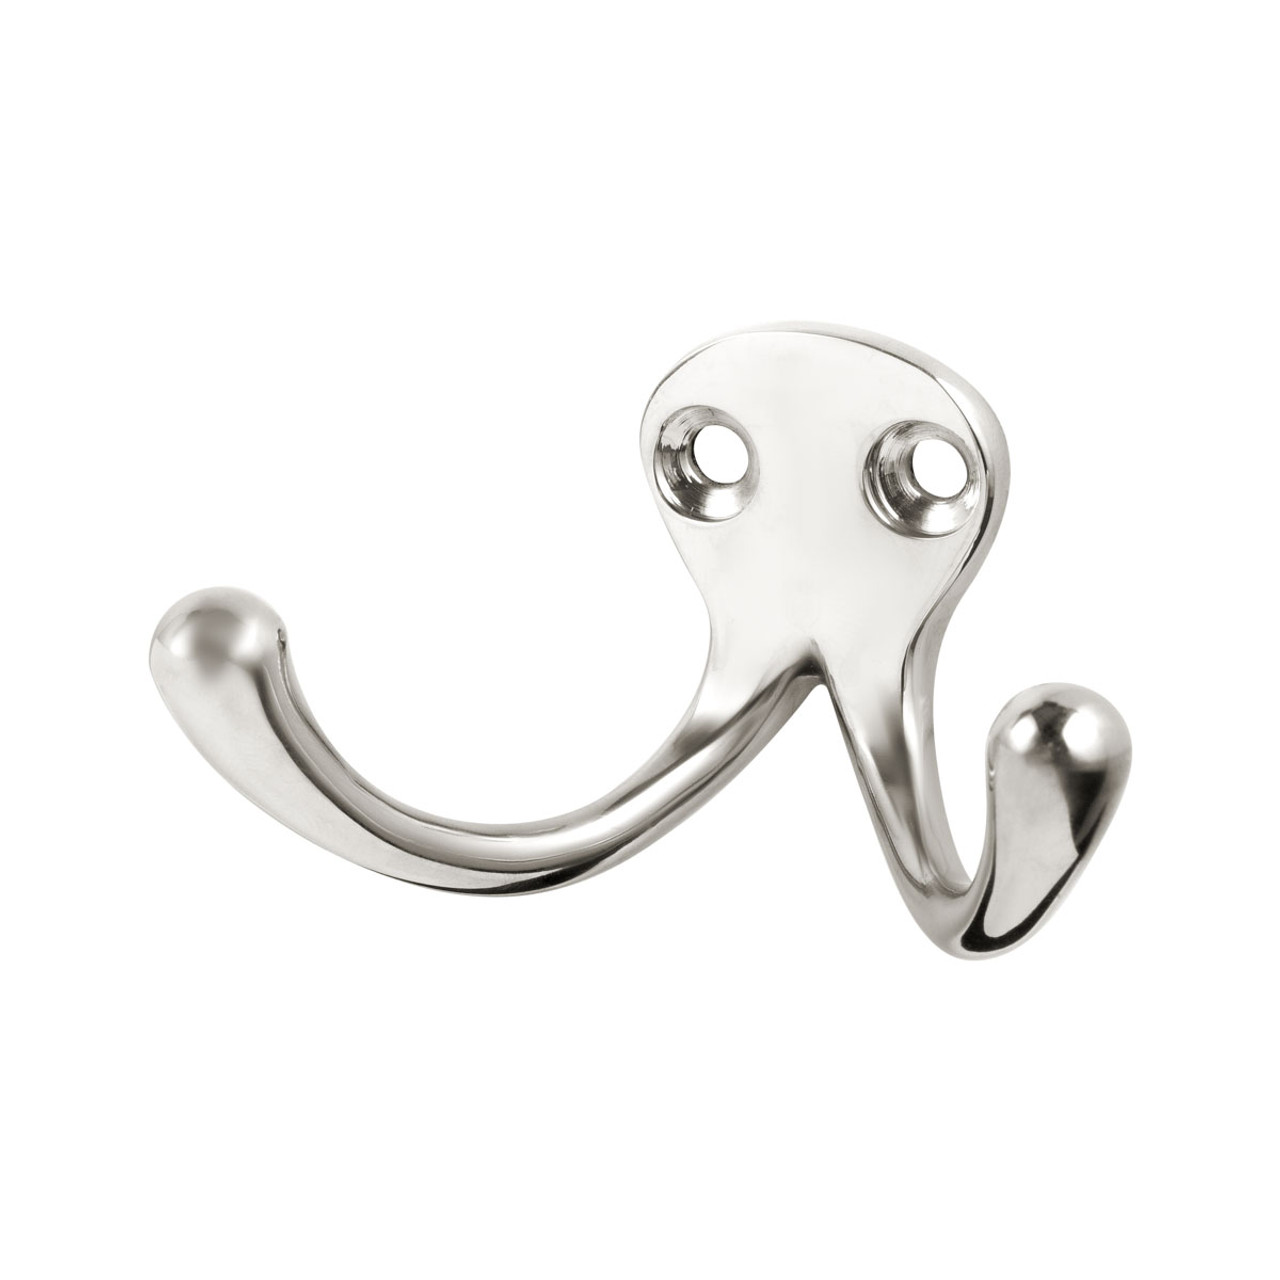 https://cdn11.bigcommerce.com/s-cznxq08r7/images/stencil/1280x1280/products/5700/15495/COATHOOK-2-PS_Bar_Face_Purse_Coat_Hook_-_Double_-_Polished_Stainless_Steel__50178.1707510598.jpg?c=1